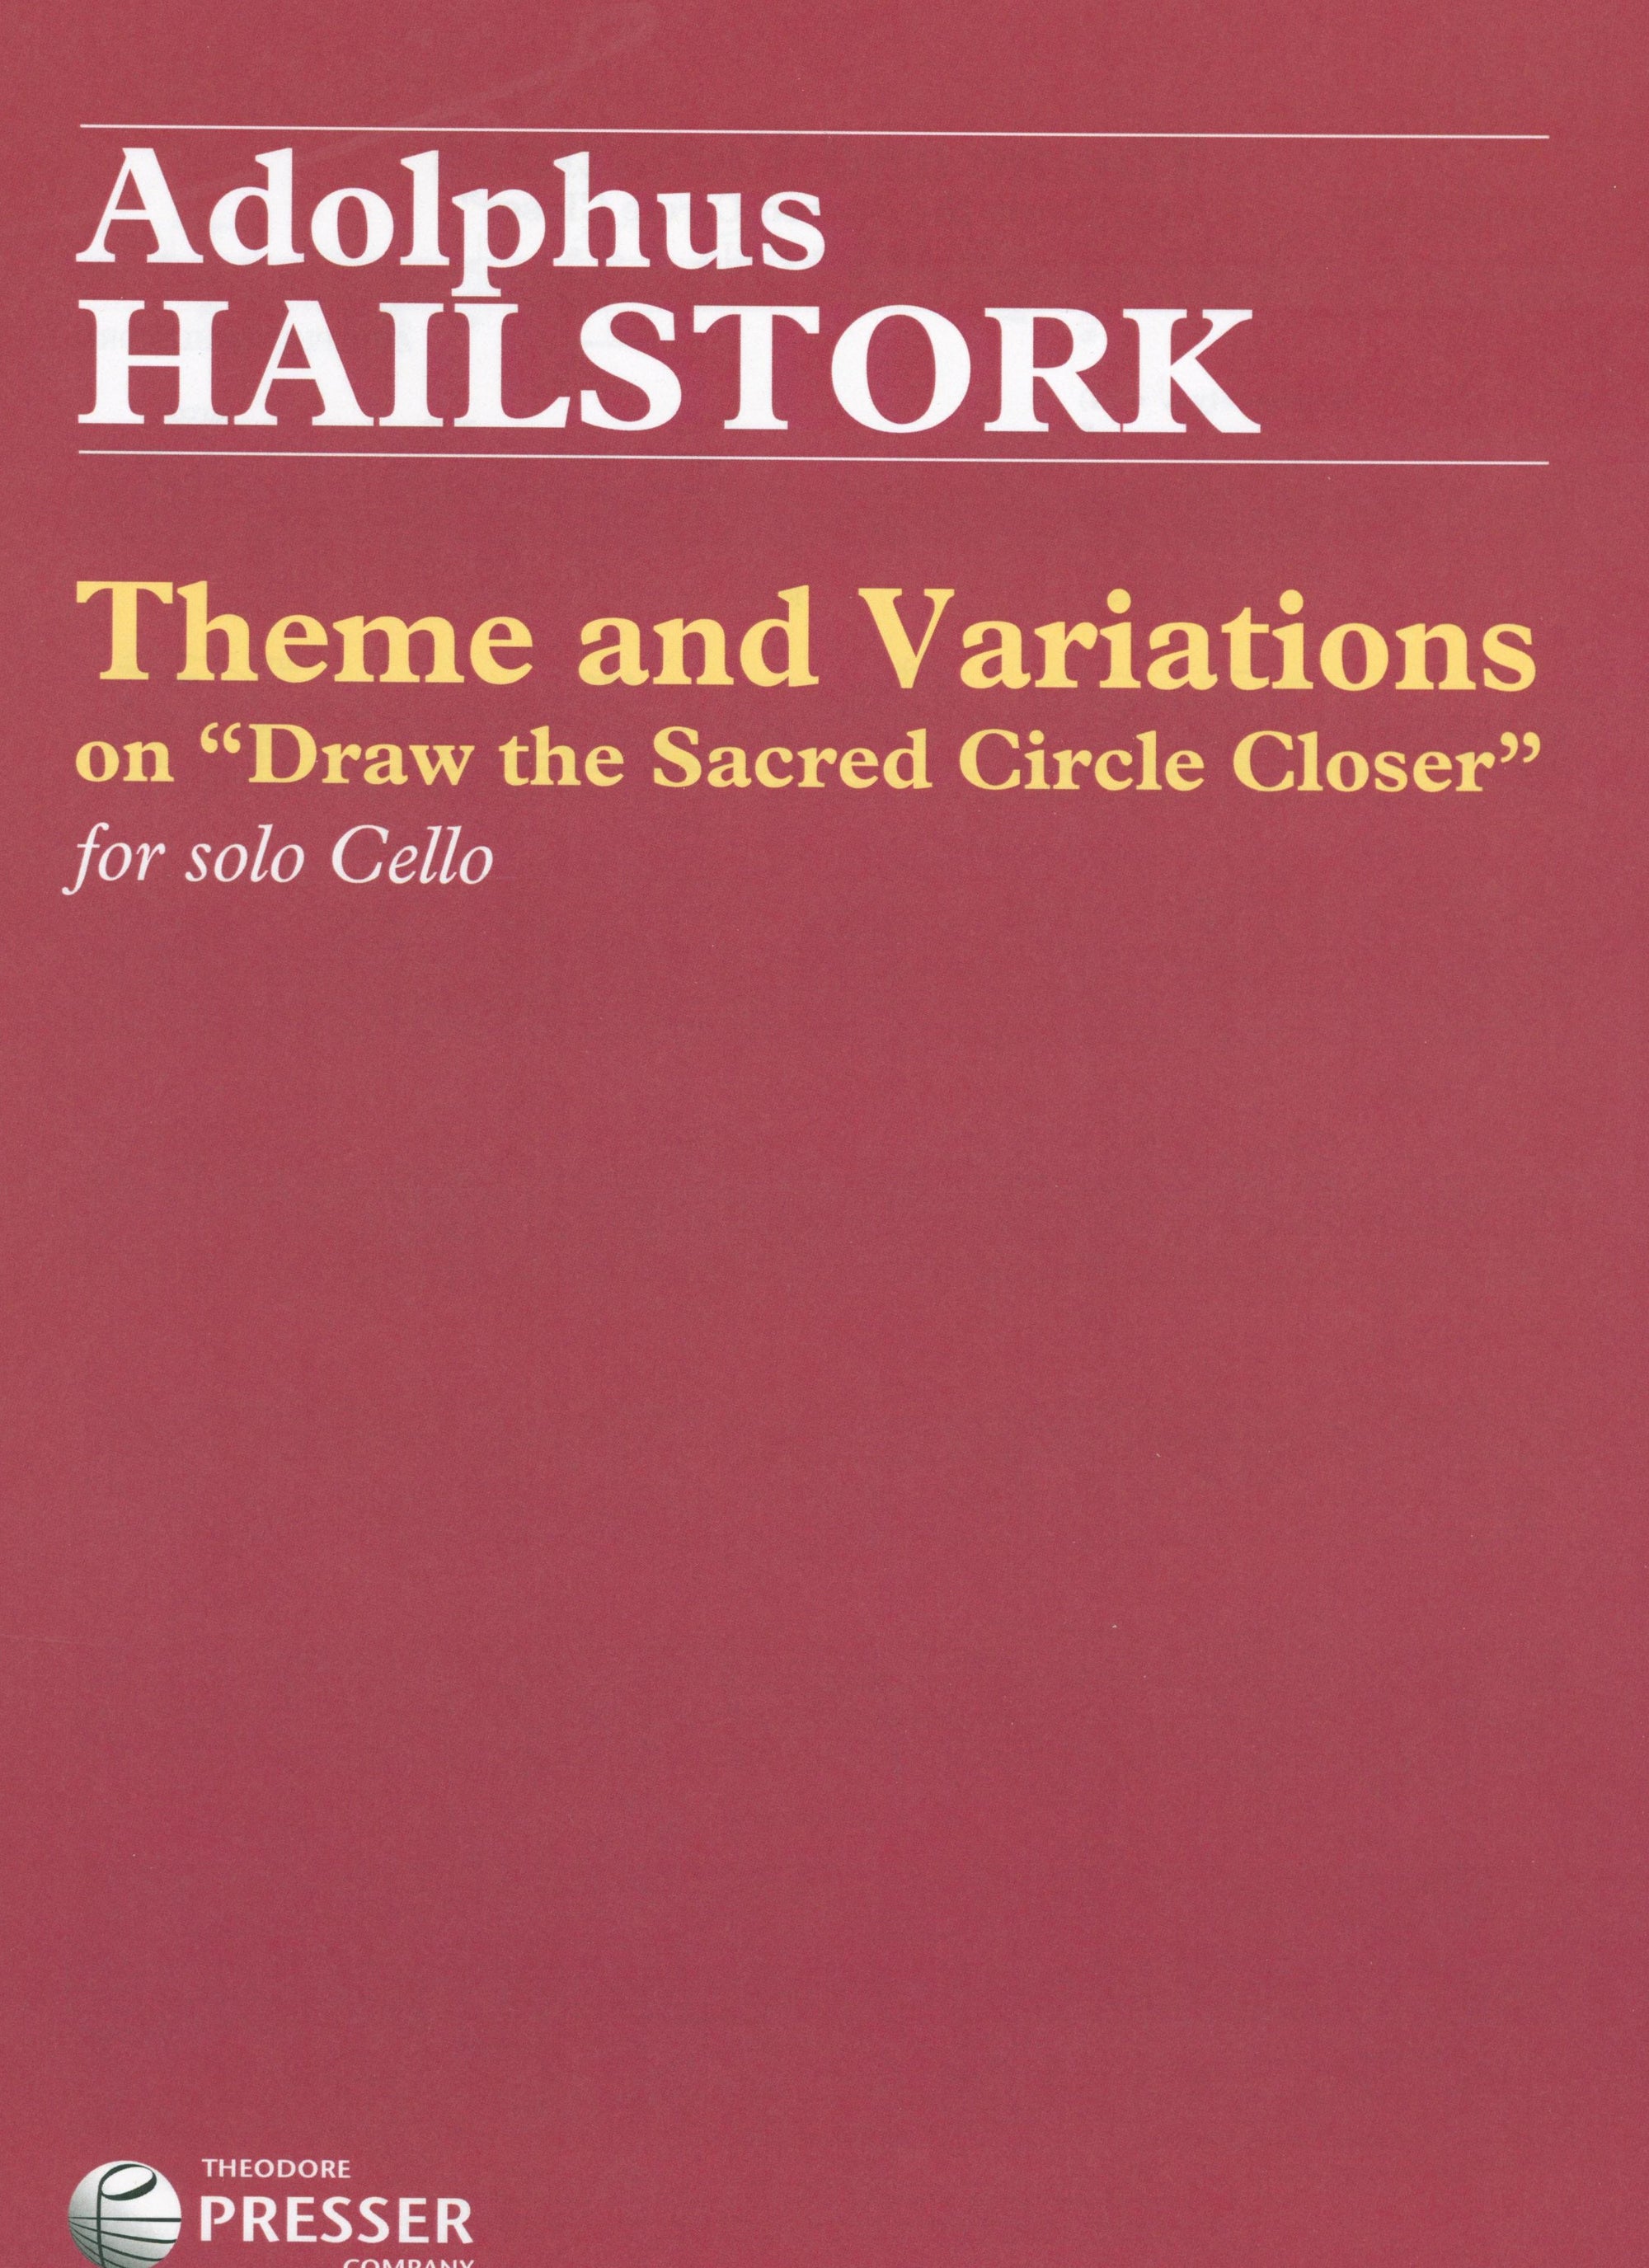 Hailstork: Theme and Variations on "Draw the Sacred Circle Closer"